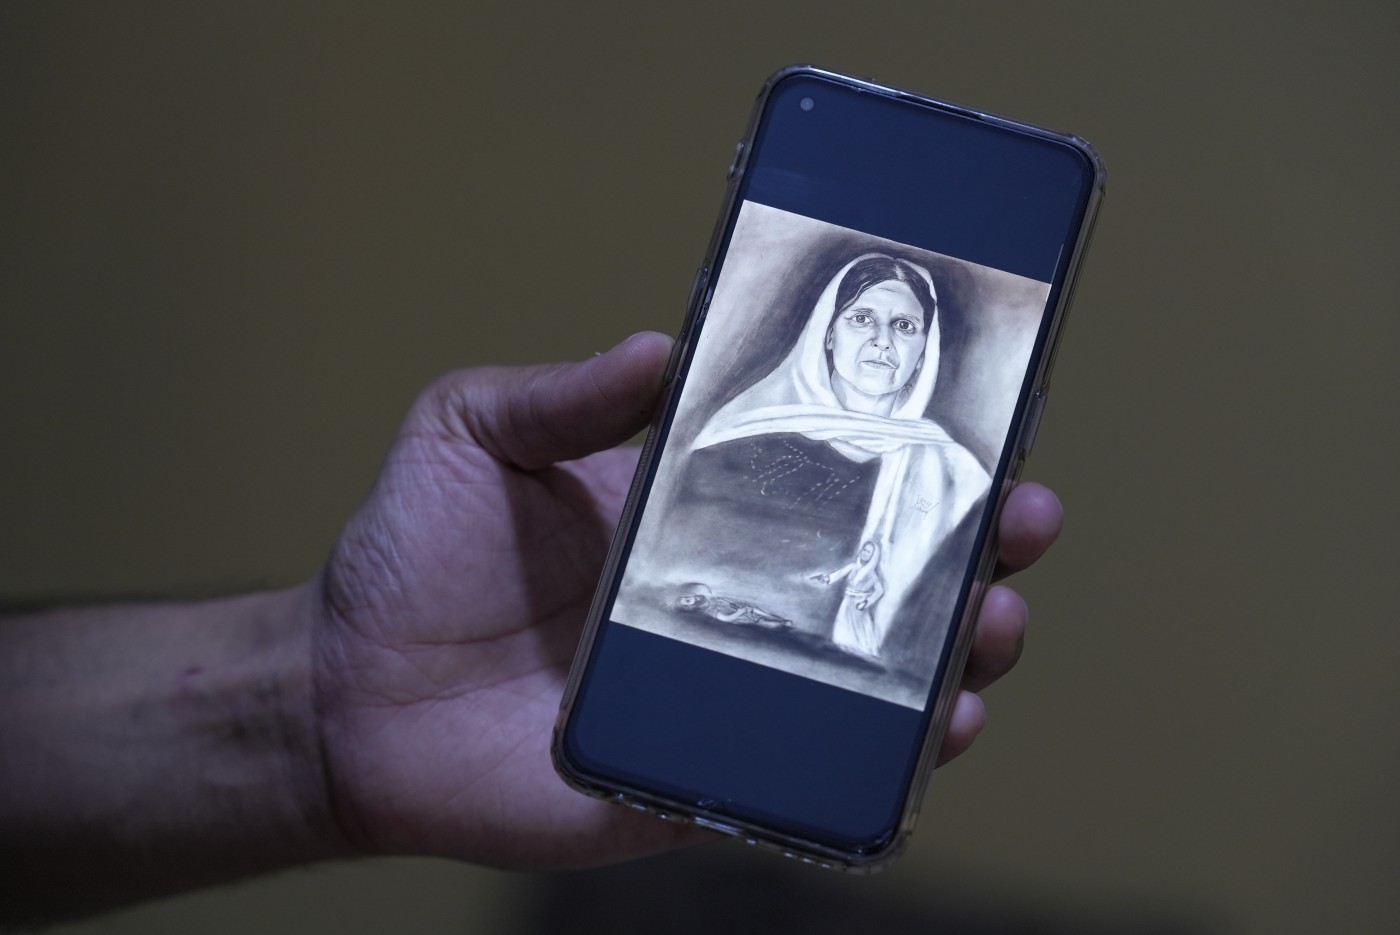 This photo features one of Badal's paintings. The woman depicted likely represents the suffering endured by the Yazidi people. Photo: Azhar Al-Rubaie.